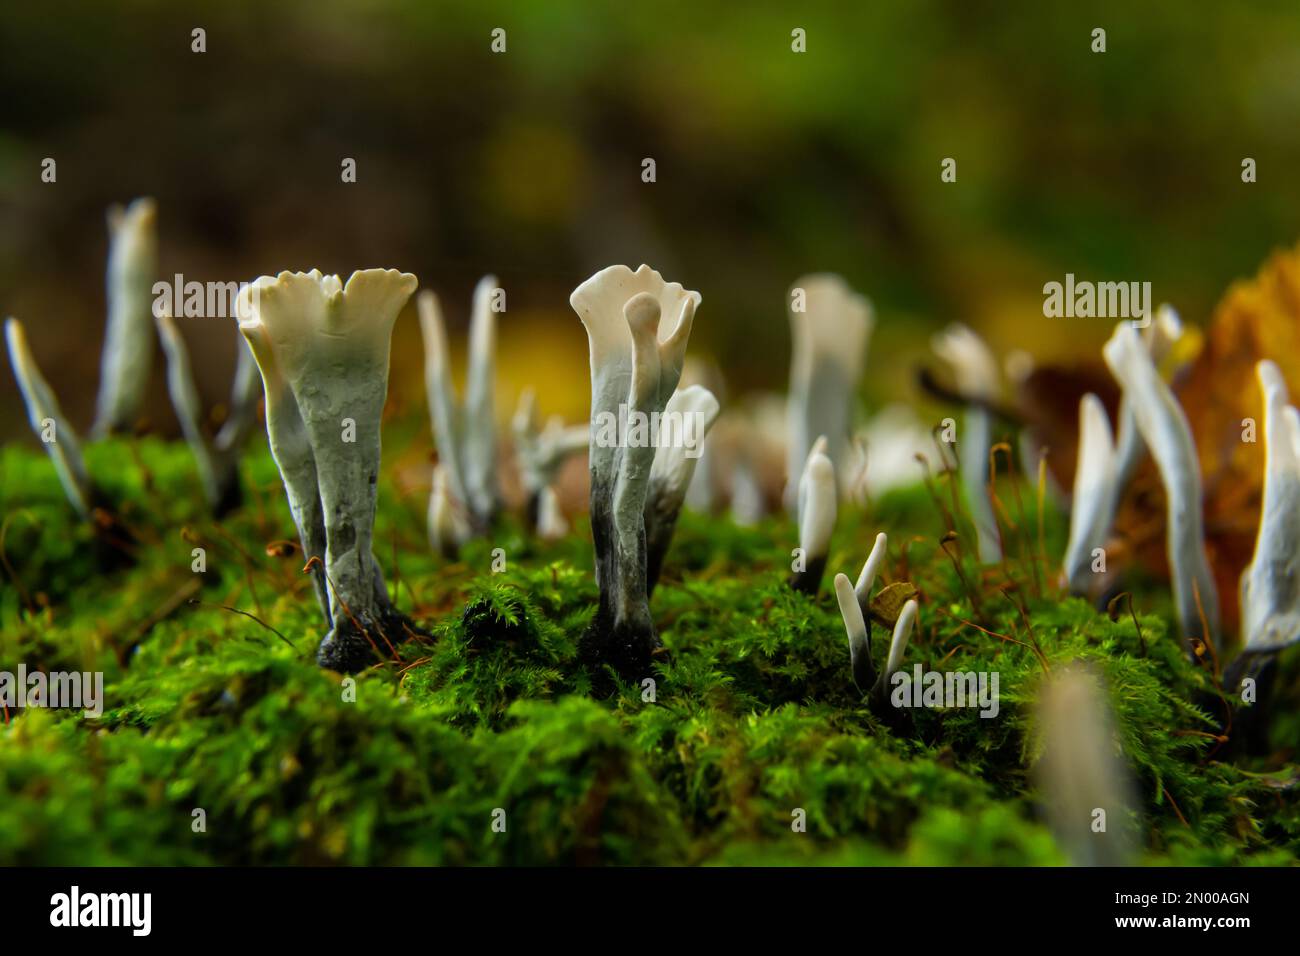 Xylaria hypoxylon is a species of fungus in the genus Xylaria. Xylaria hypoxylon, known as the candlestick fungus, the candlesnuff fungus, carbon antl Stock Photo